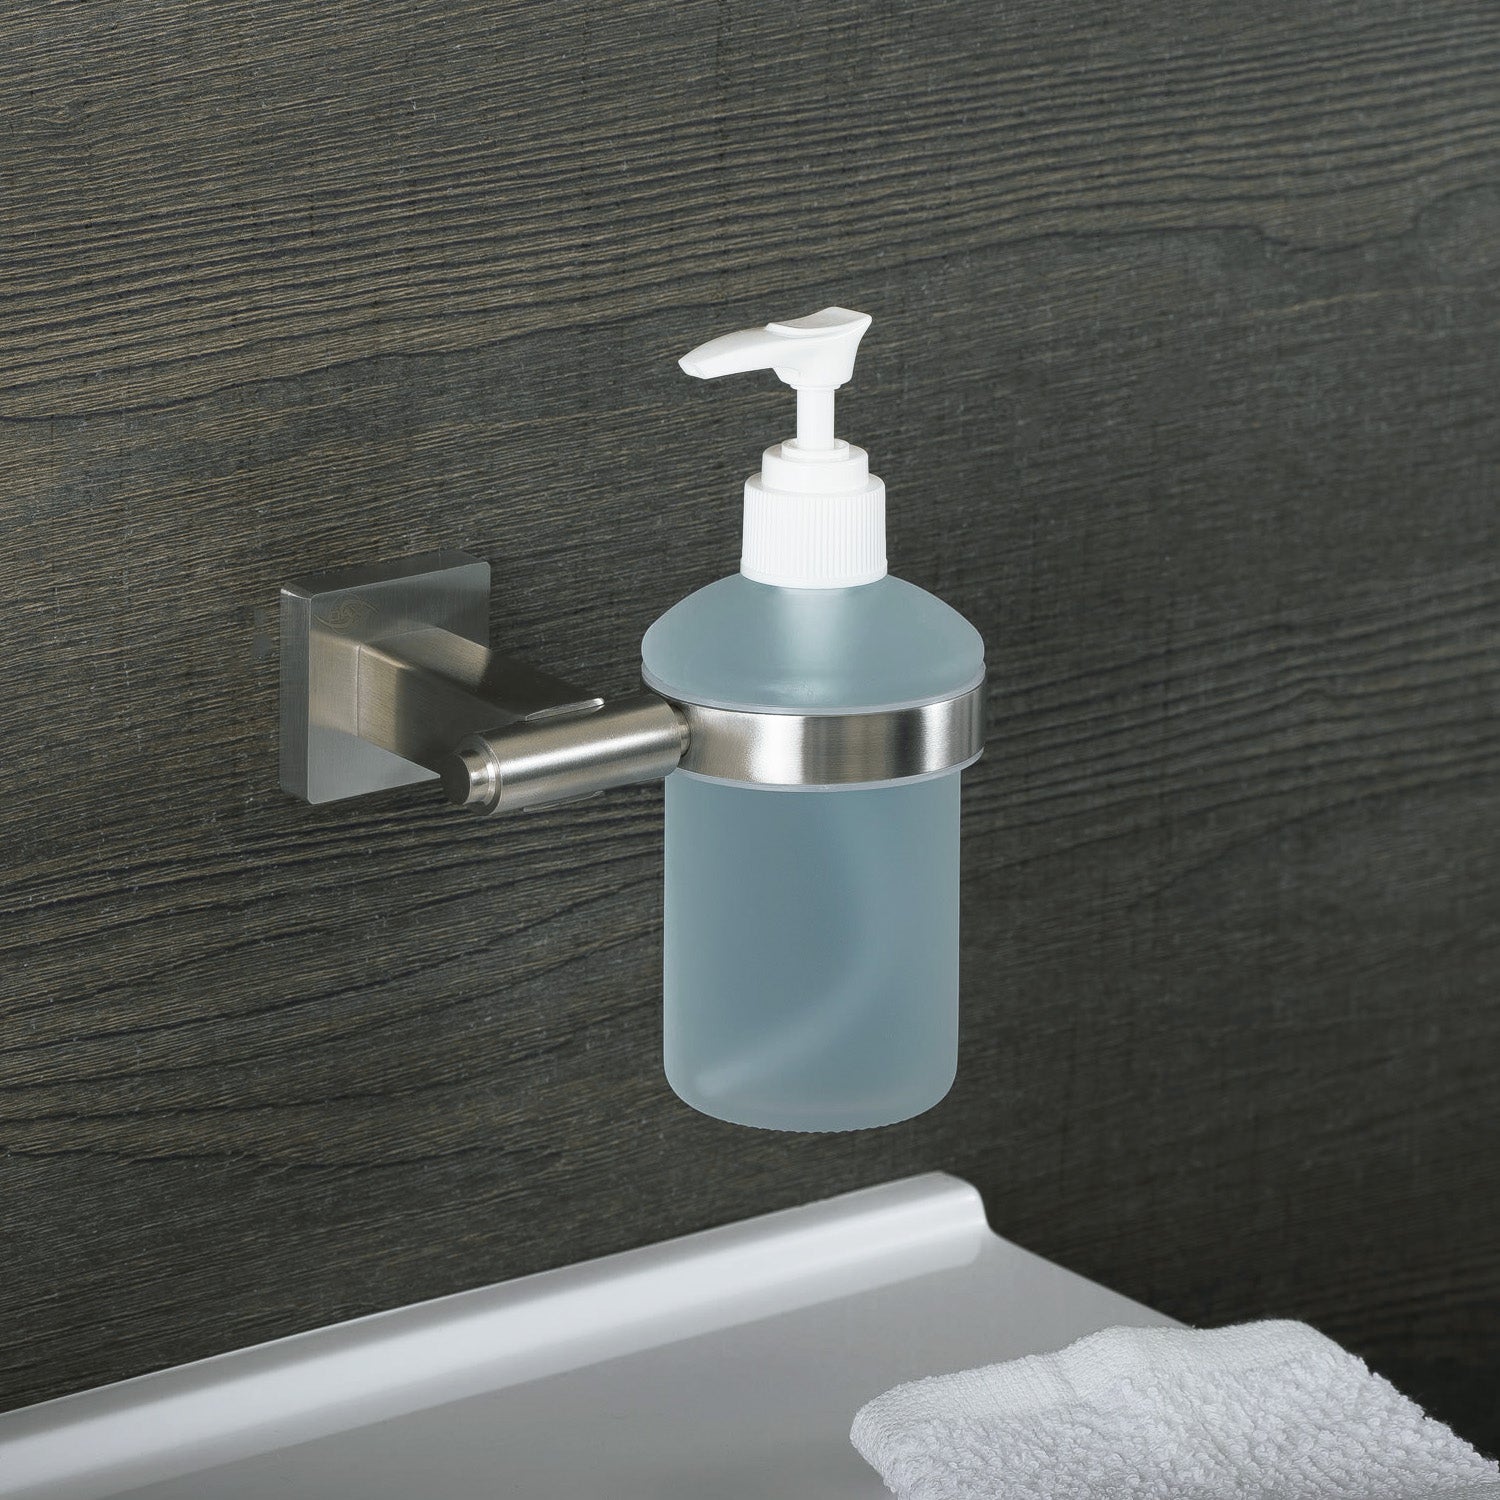 DAX Stainless Steel Soap Dispenser with Glass Bottle, Wall Mount, Polish Finish, 6-1/2 x 4-1/2 x 3-3/4 Inches (DAX-G0113-P)